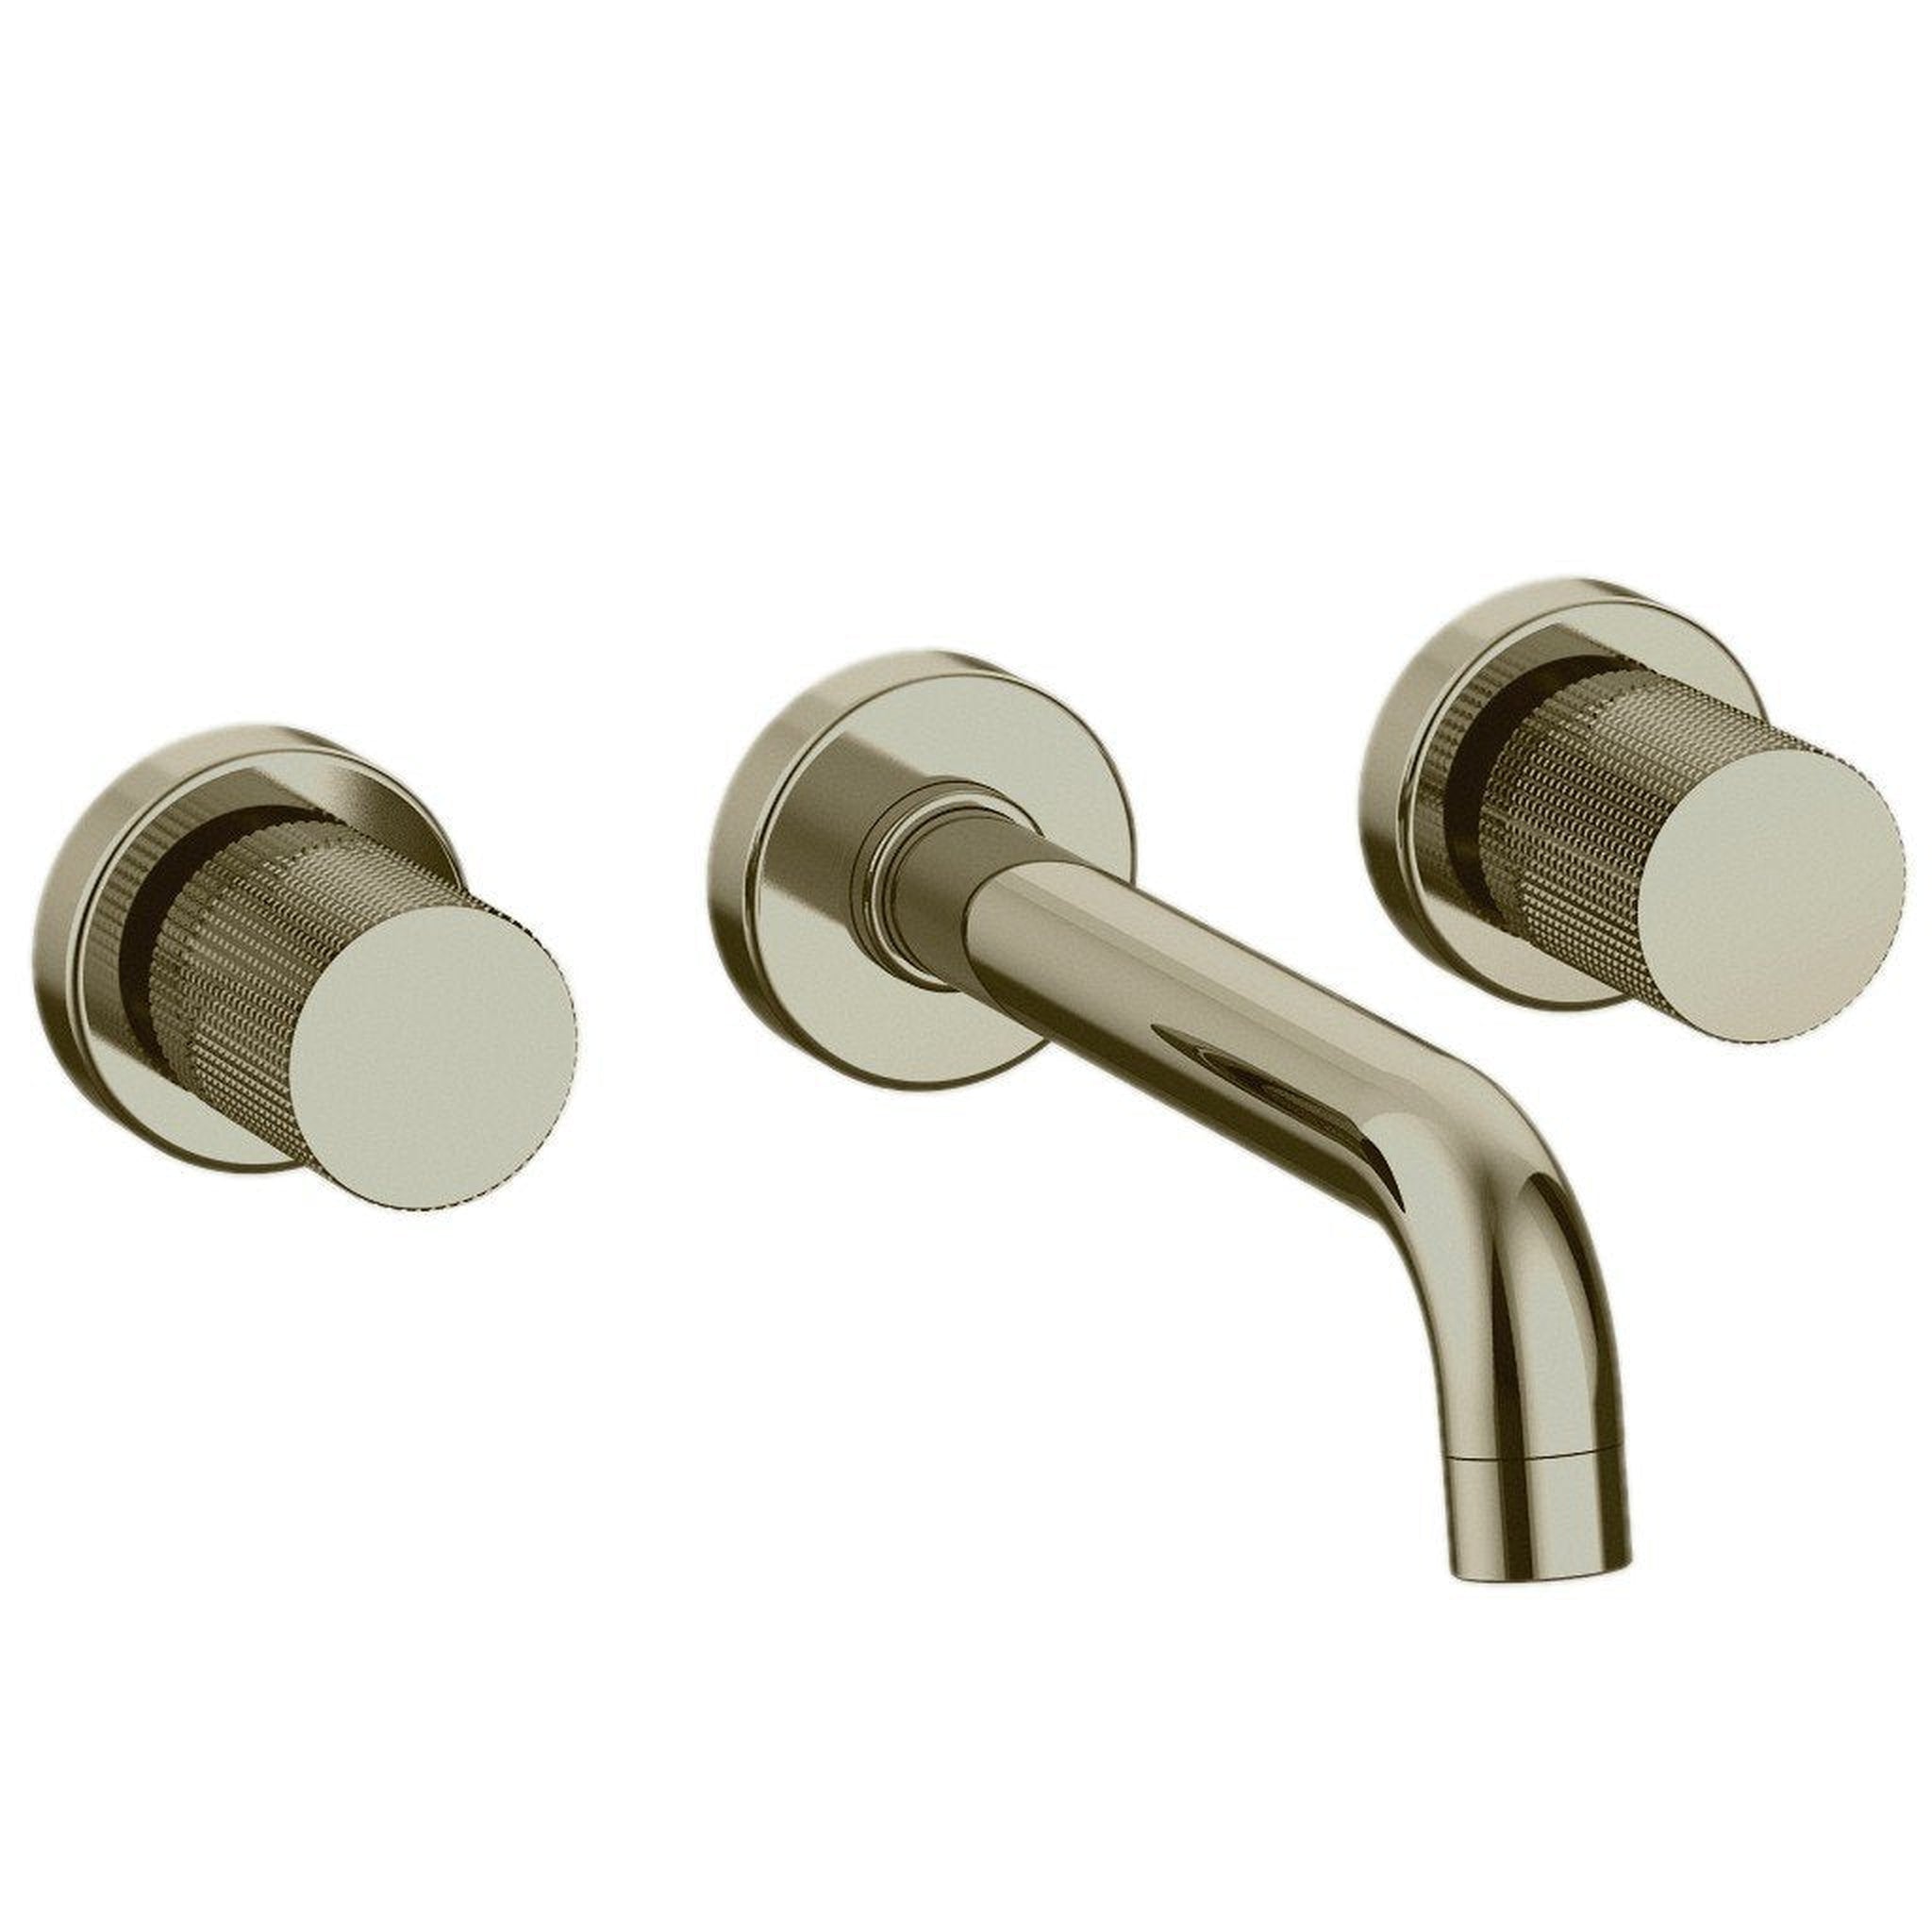 LaToscana by Paini, LaToscana Alessandra Brushed Nickel Wall-Mounted Lavatory Faucet With Grip Handles